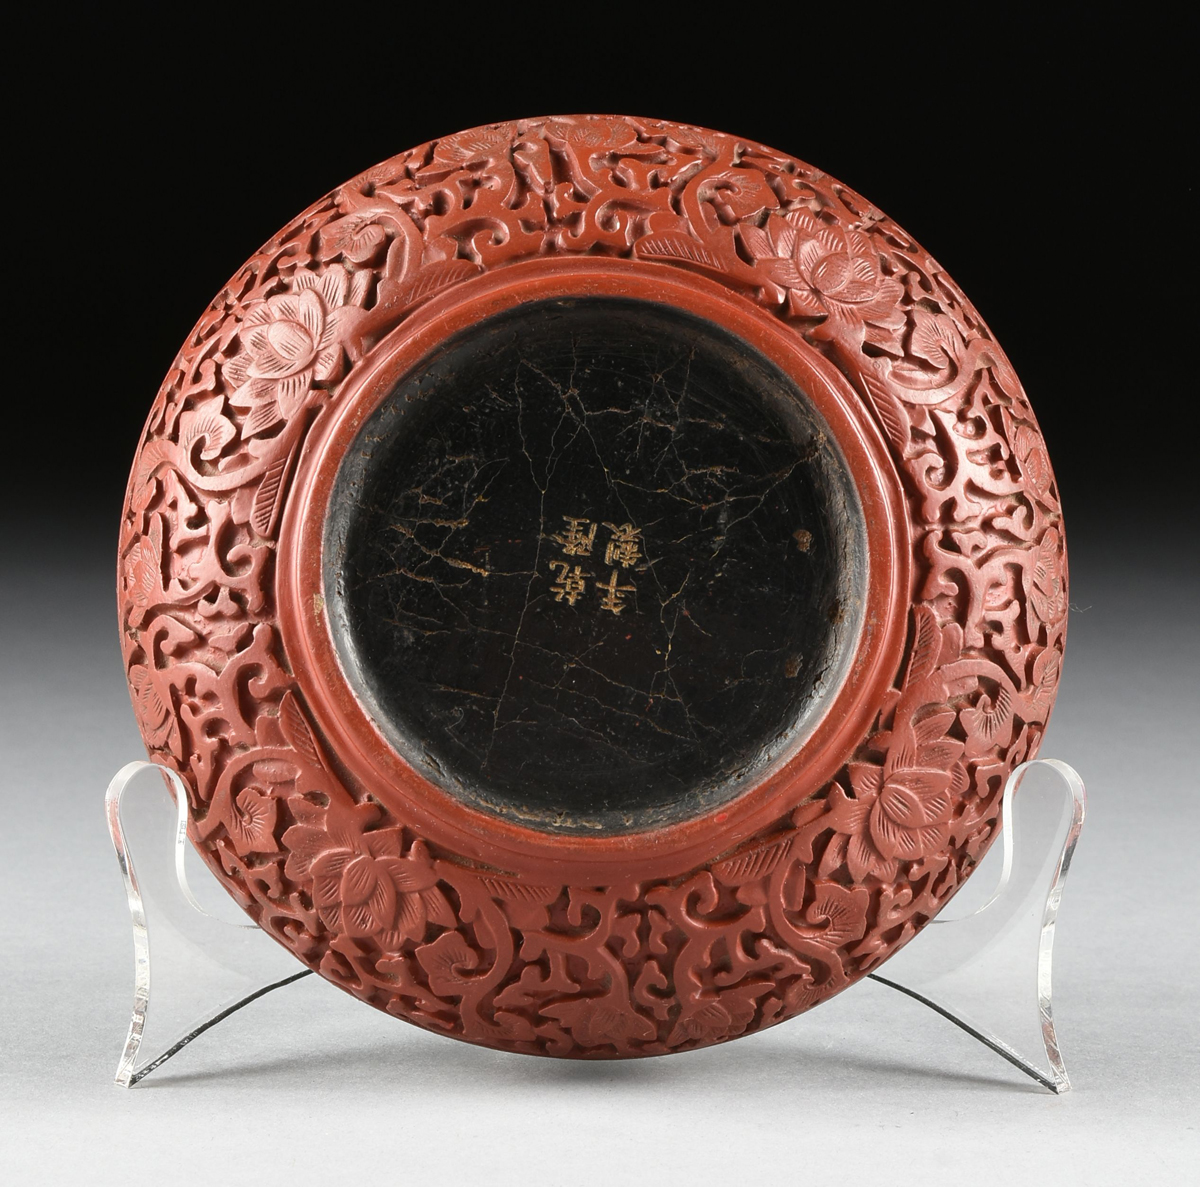 A CHINESE CARVED CINNABAR LACQUER COVERED BOX, REPUBLIC PERIOD CIRCA 1917-1949, the circular - Image 9 of 10